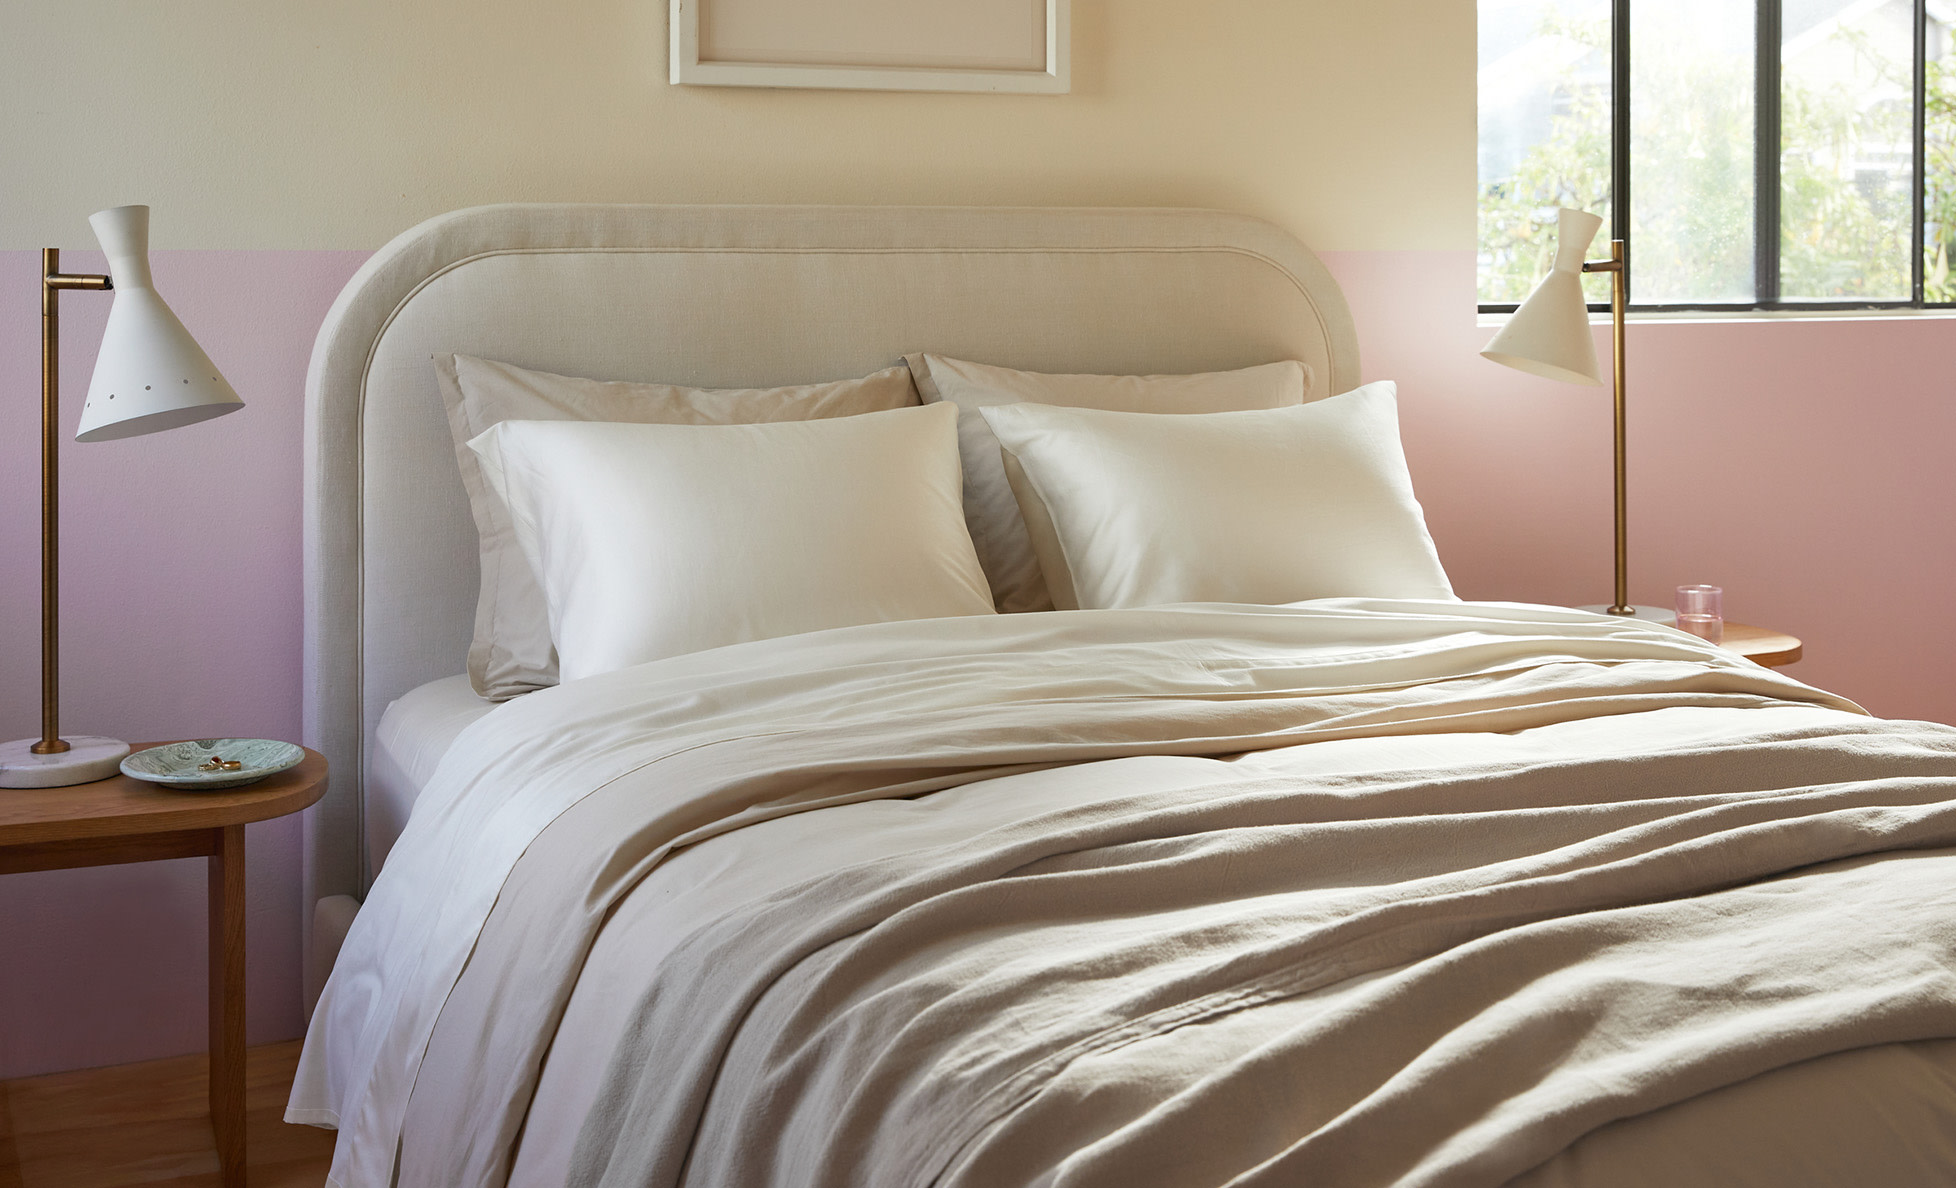 A tidy bed with neutral sateen sheets